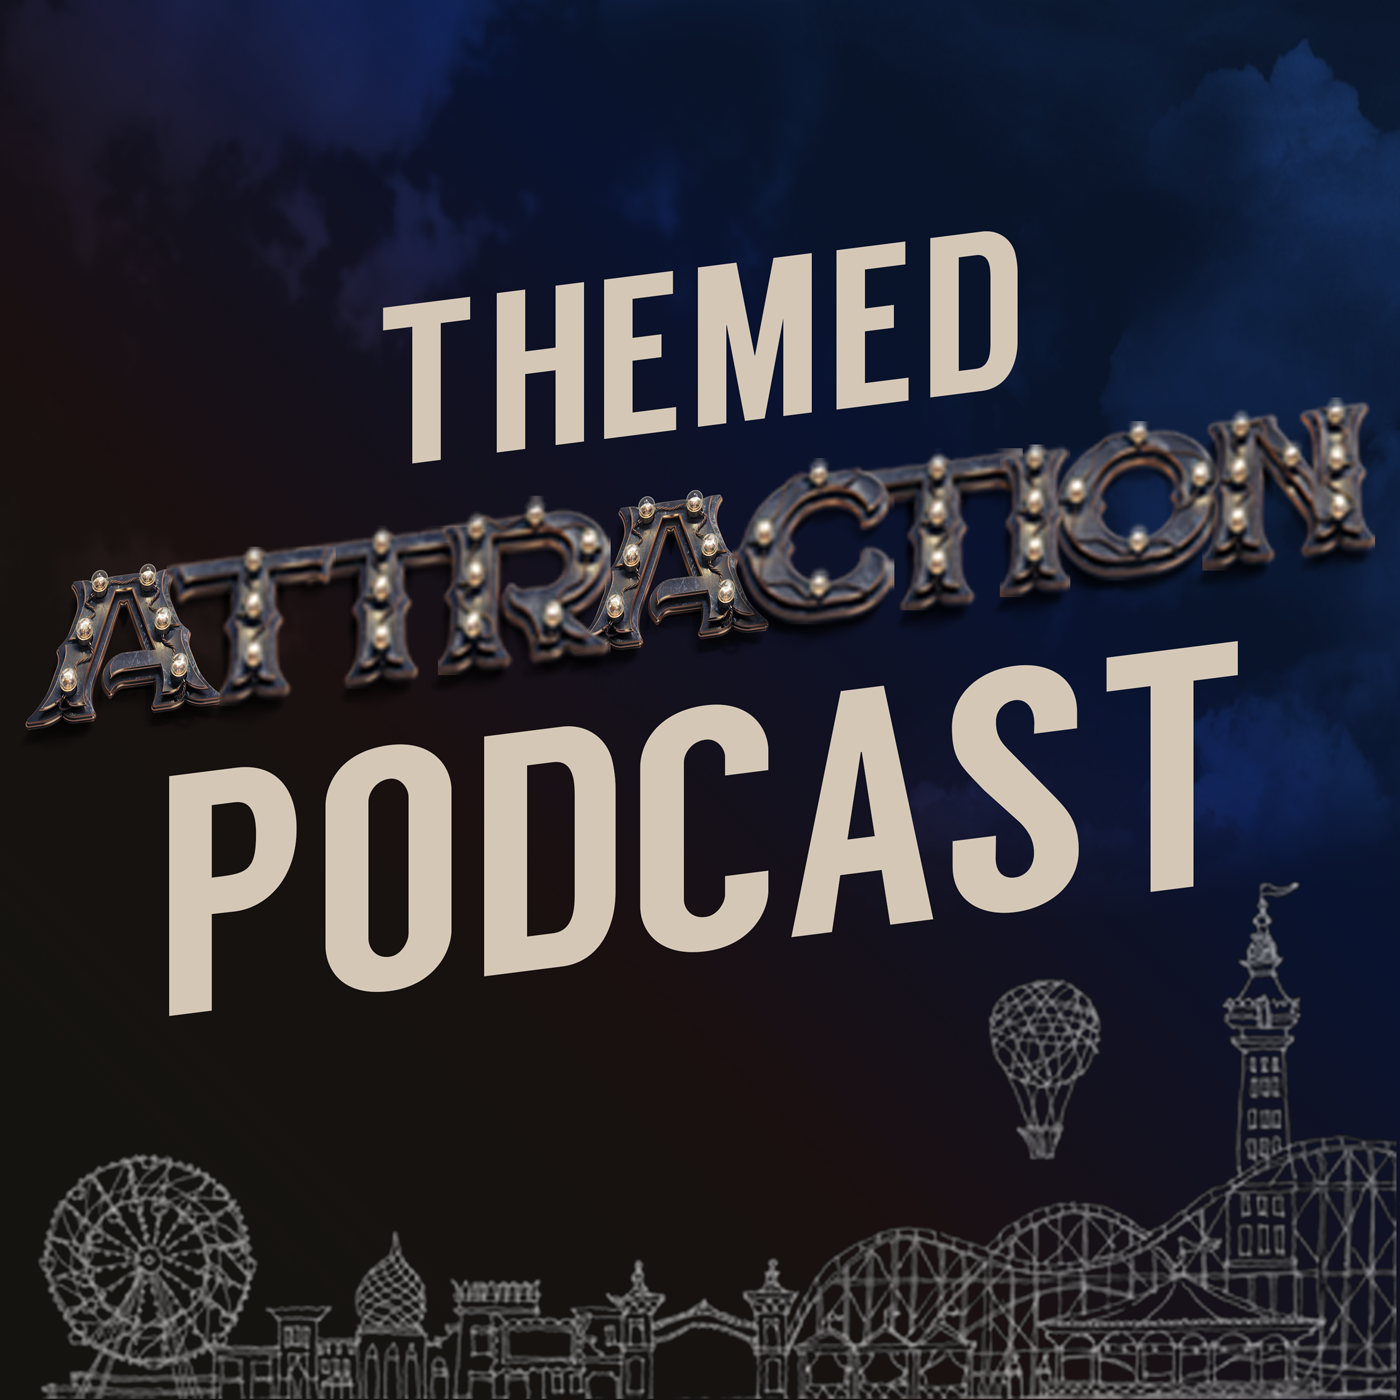 The Themed Attraction Podcast